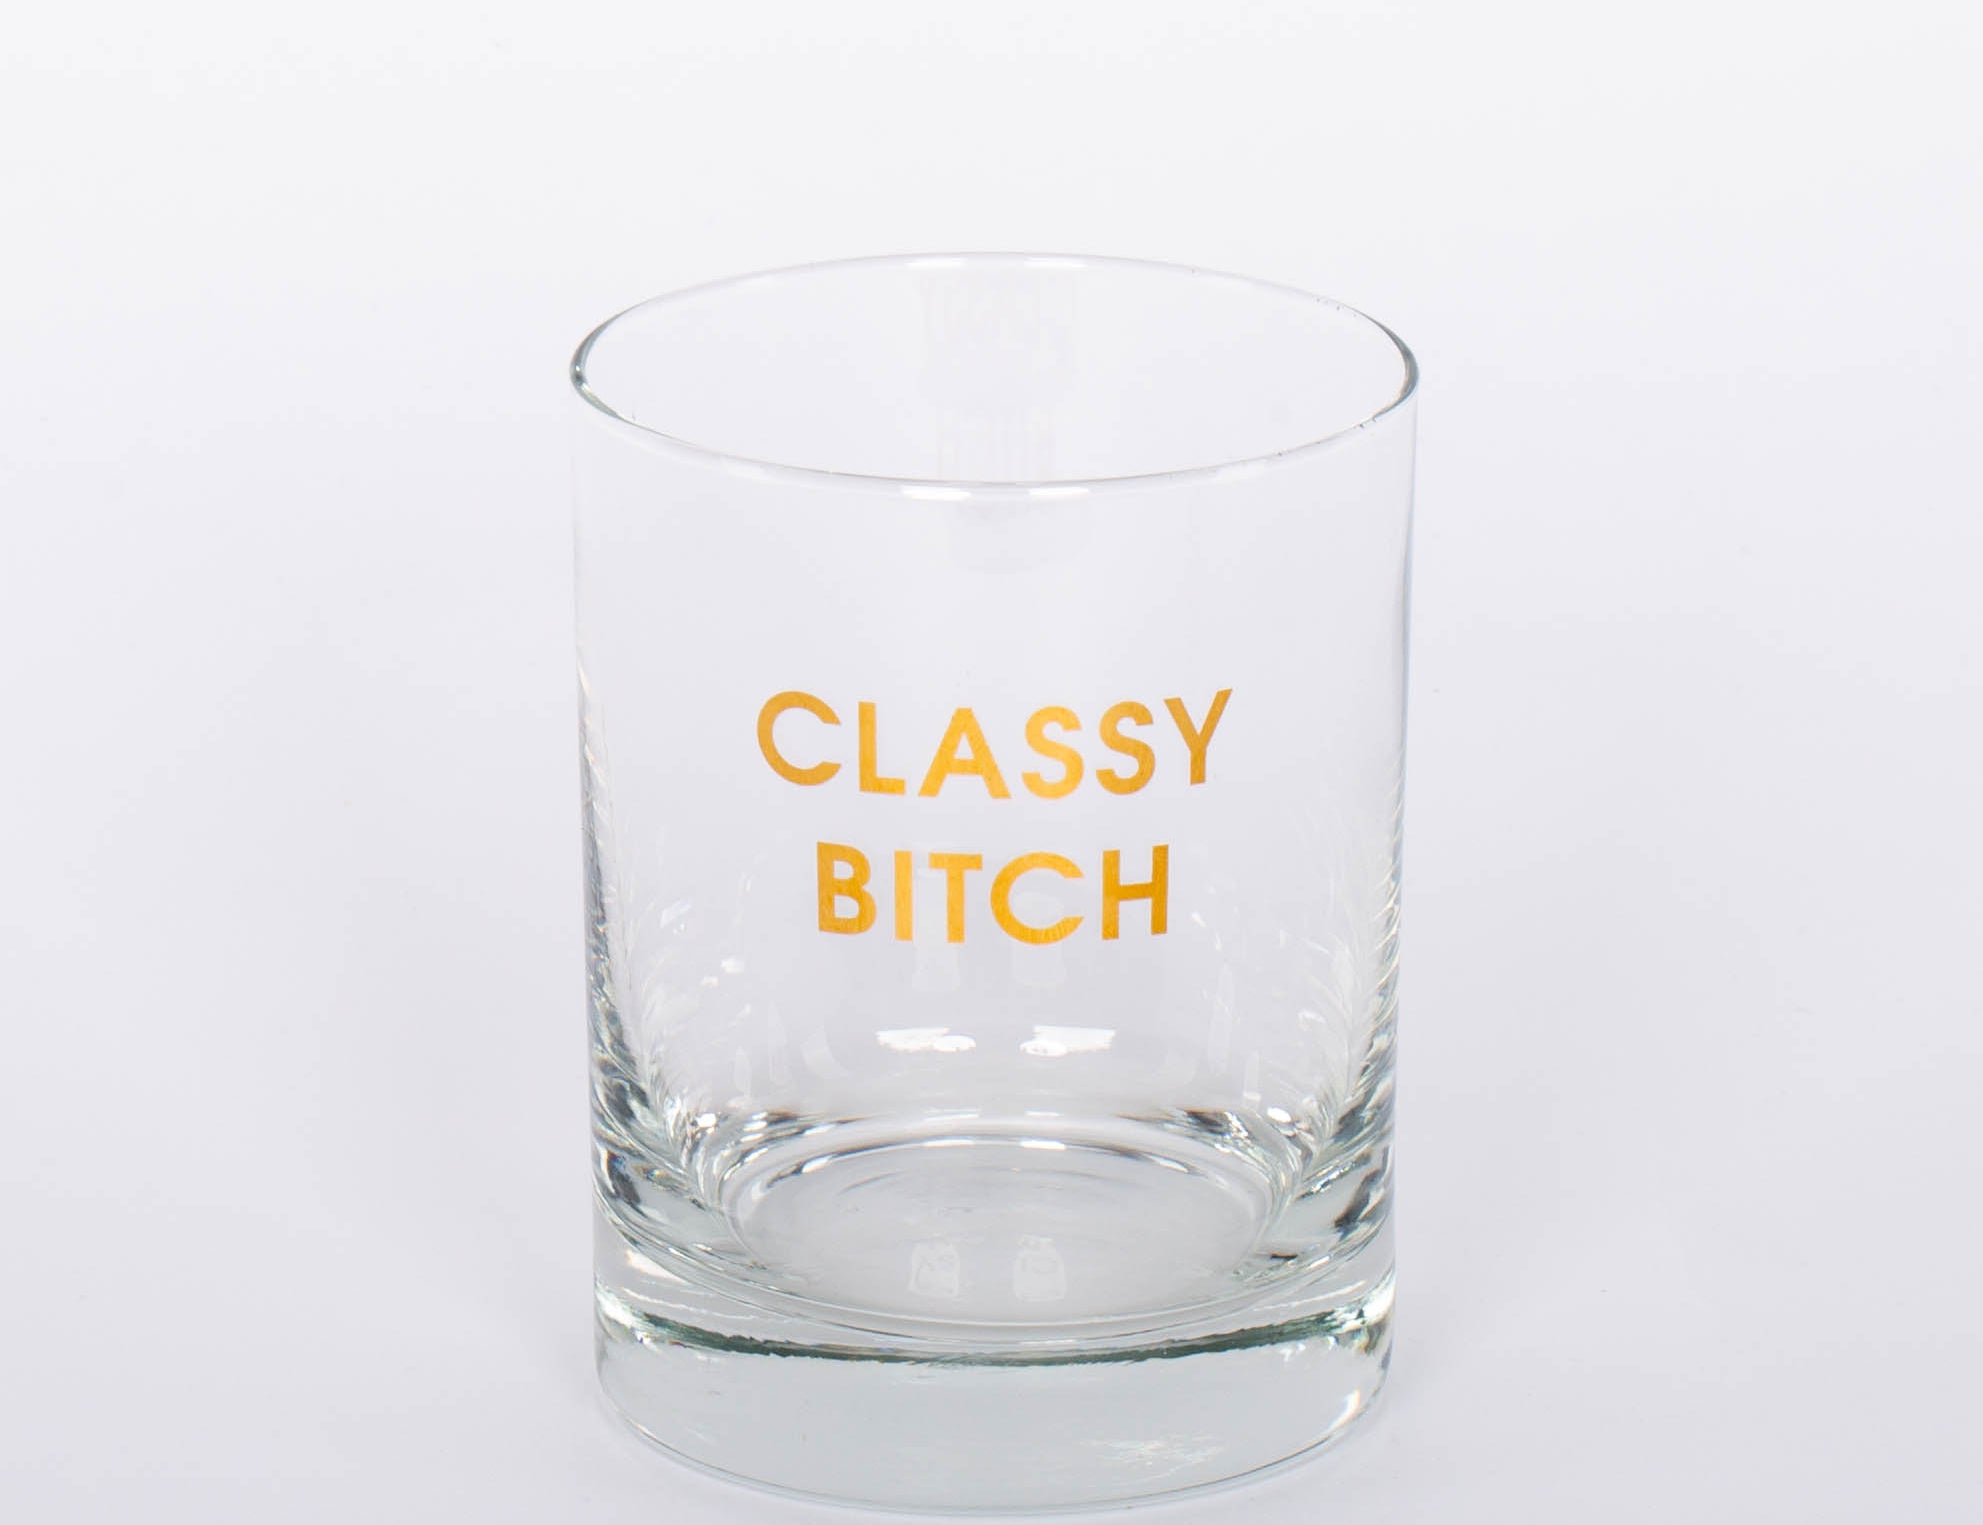 Crush your cocktail in style with our "Classy Bitch" gold foil rocks glass.